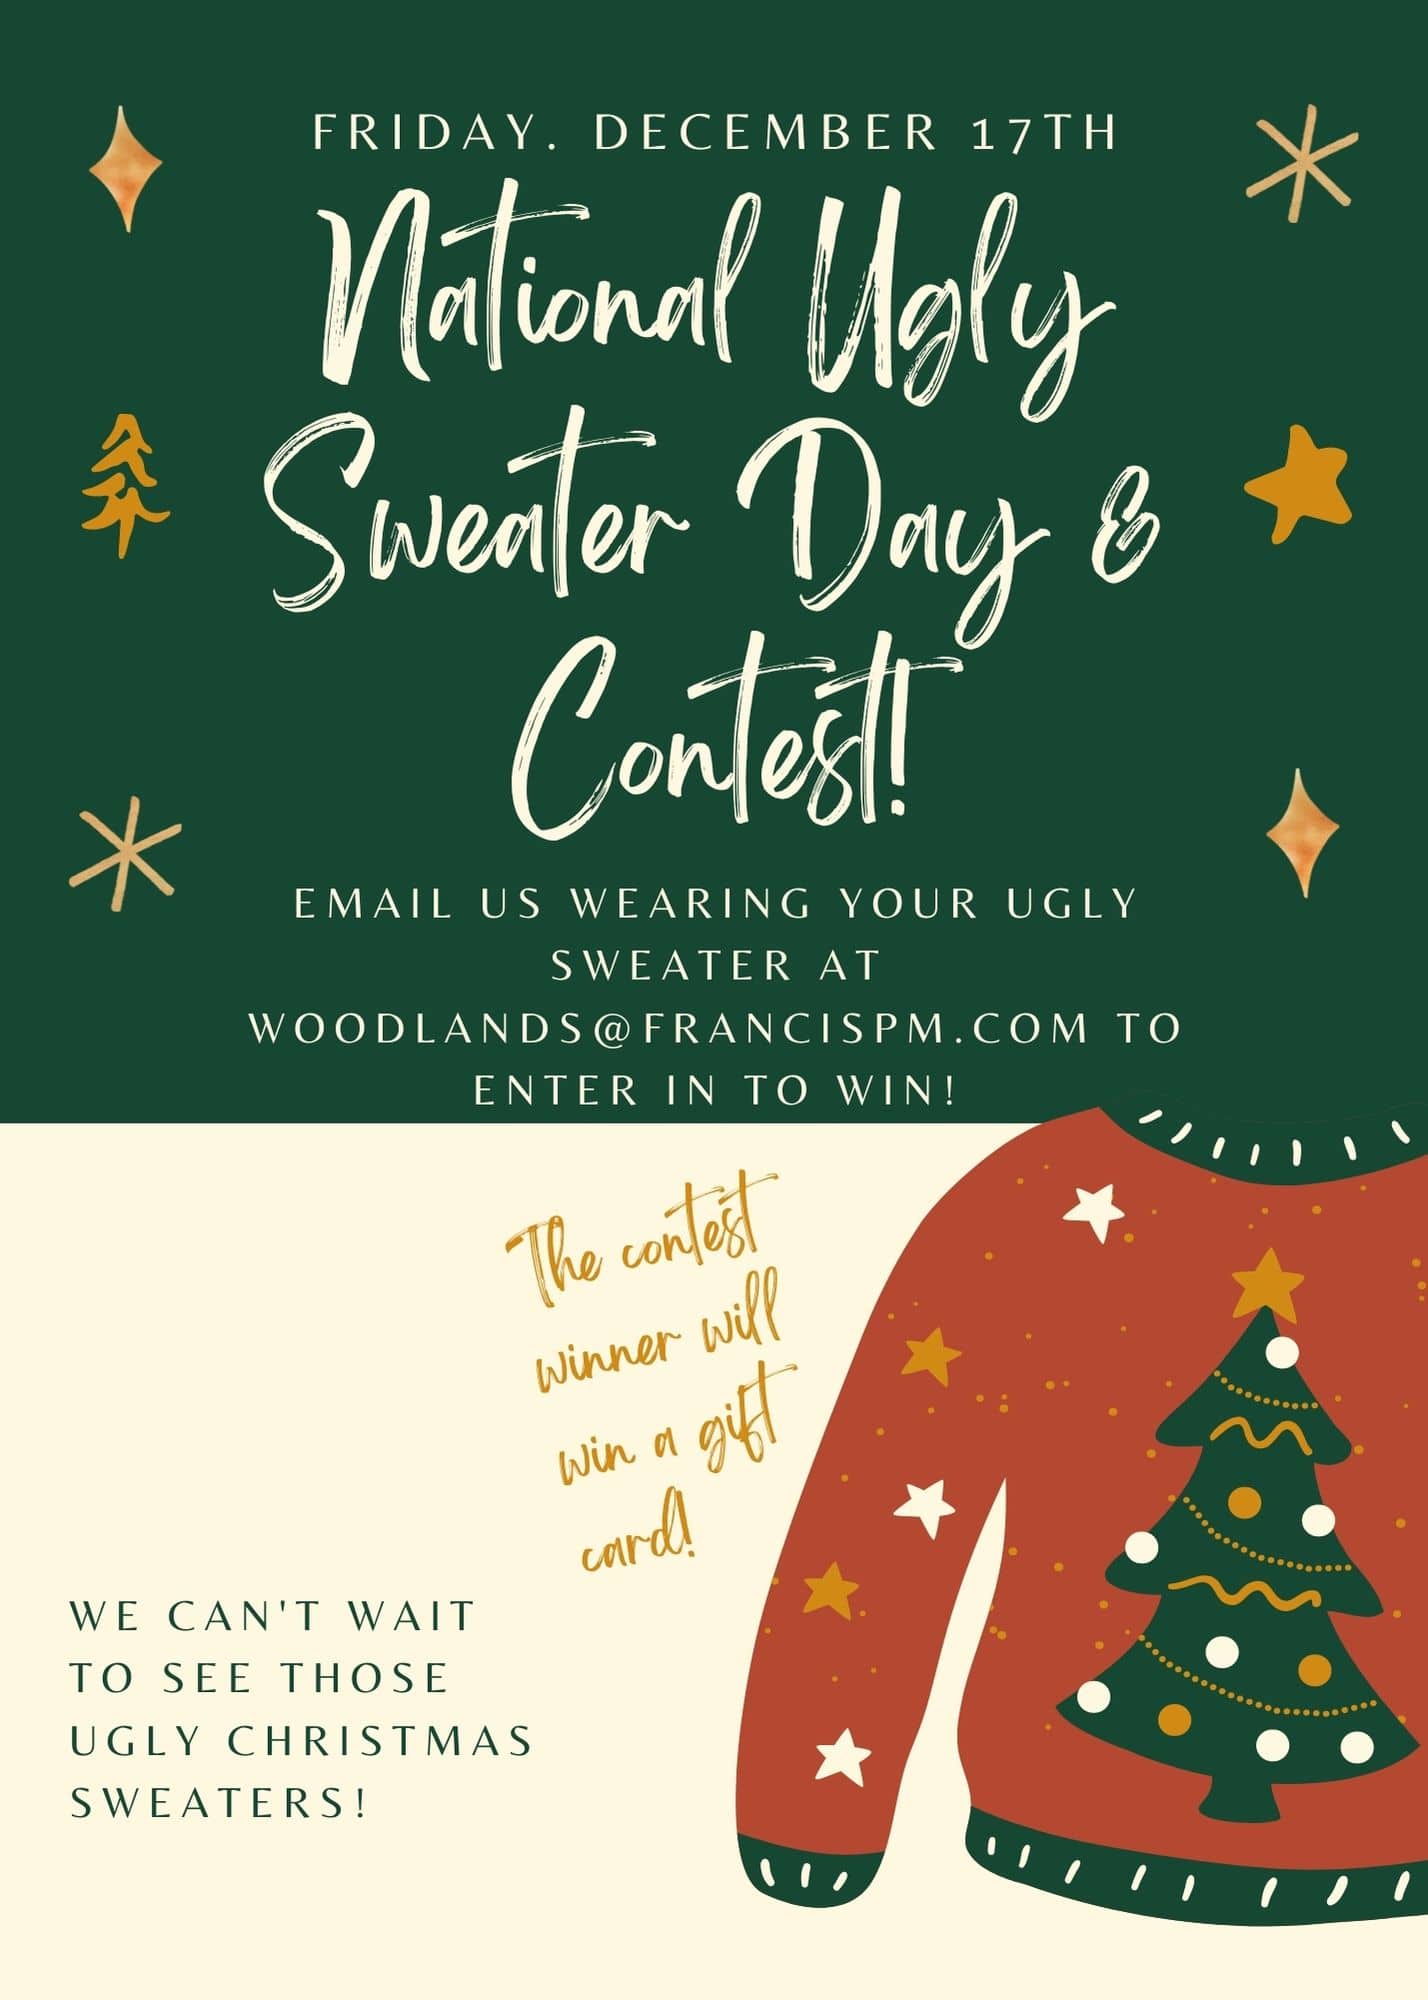 A poster for a sweater day contest in The Woodlands TX.